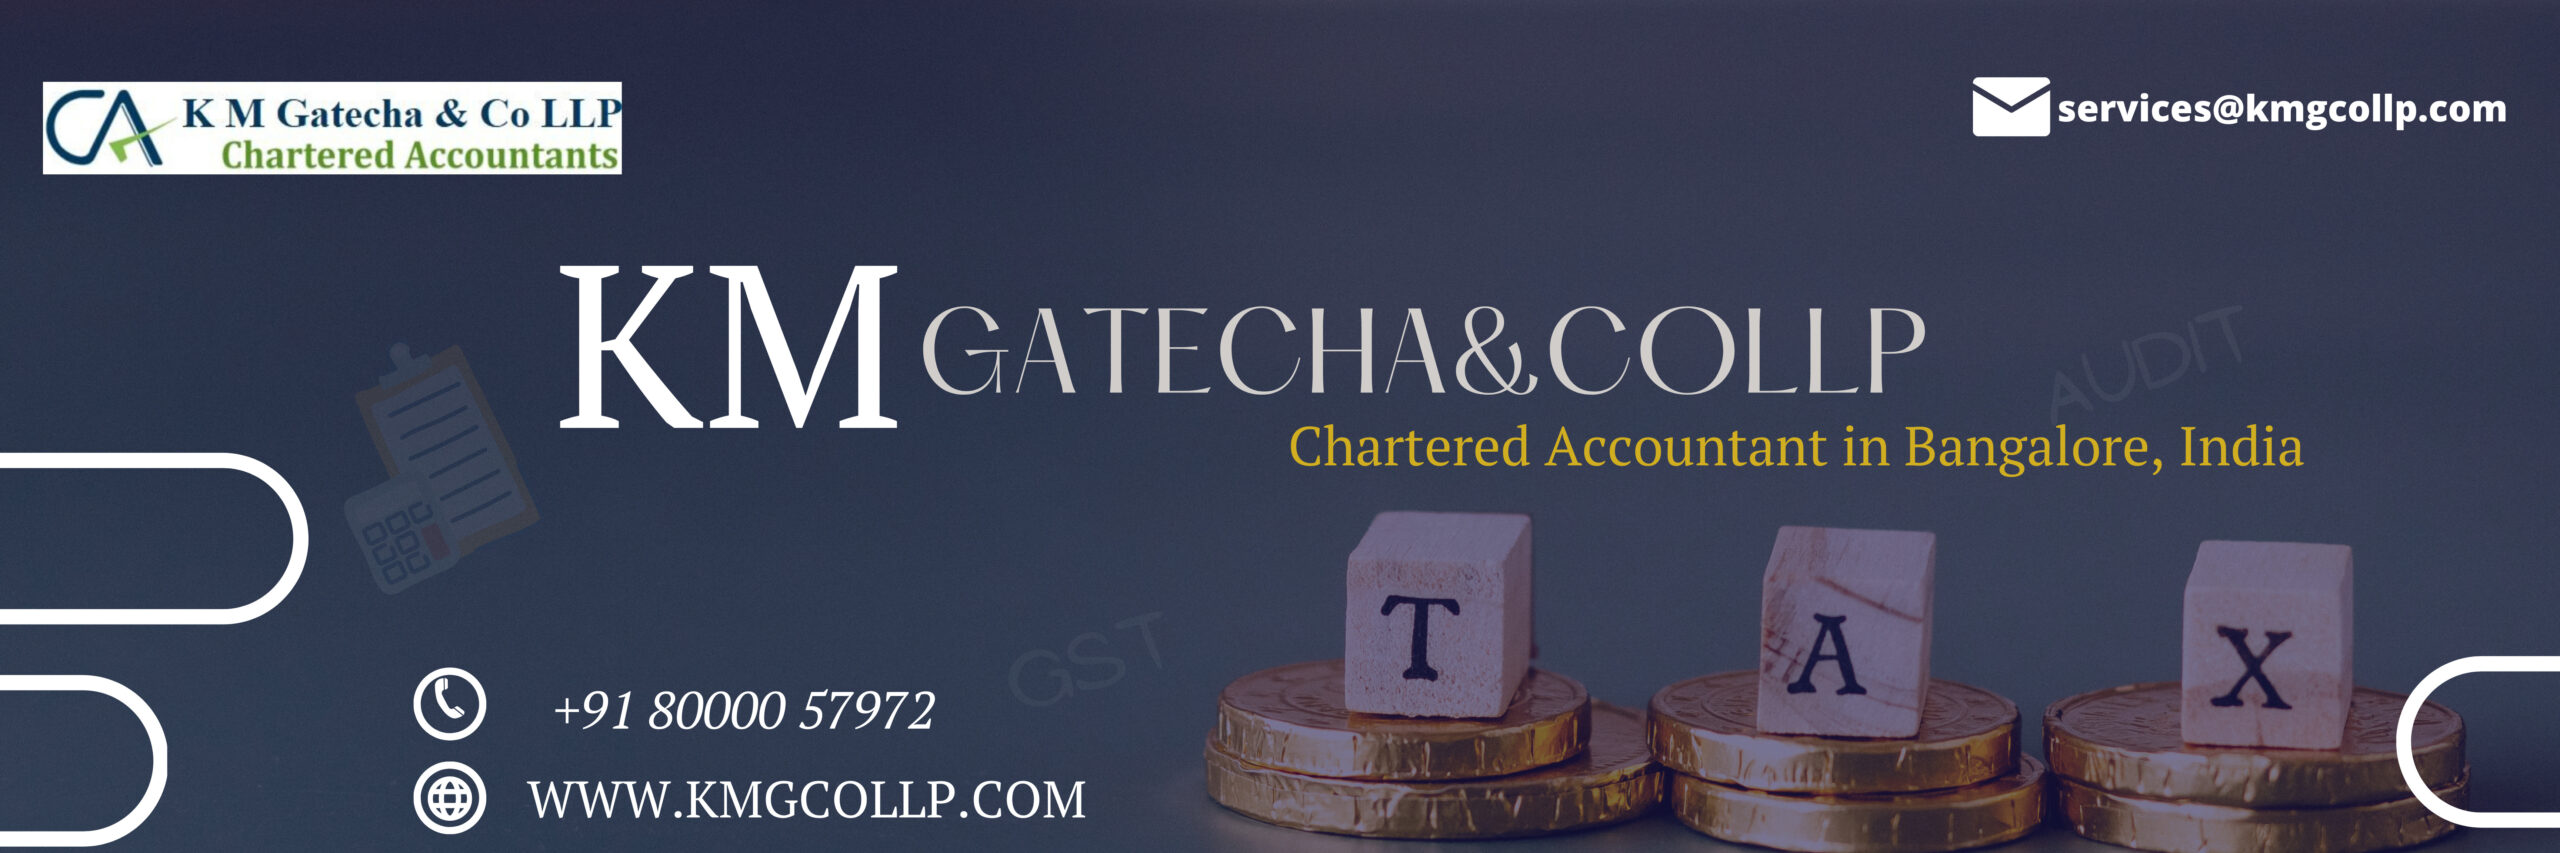 ca chartered accountant in Bangalore